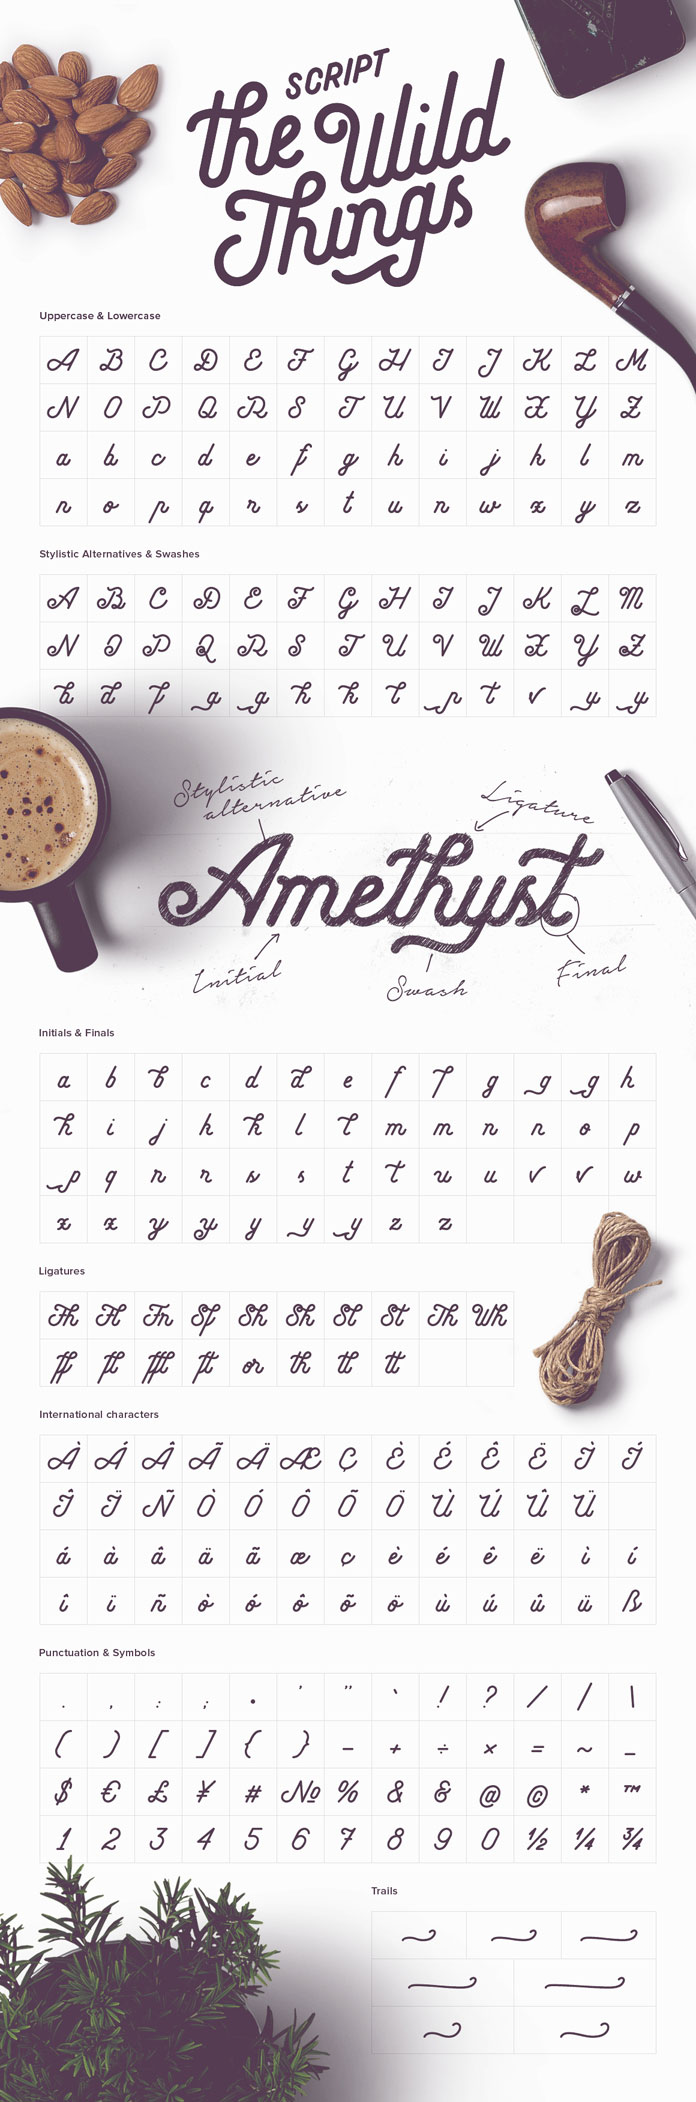 An overview of the Script typeface with all uppercases and lowercases, stylistic alternatives and swashes, initials and finals, ligatures, international characters, punctuation and symbols, trails.